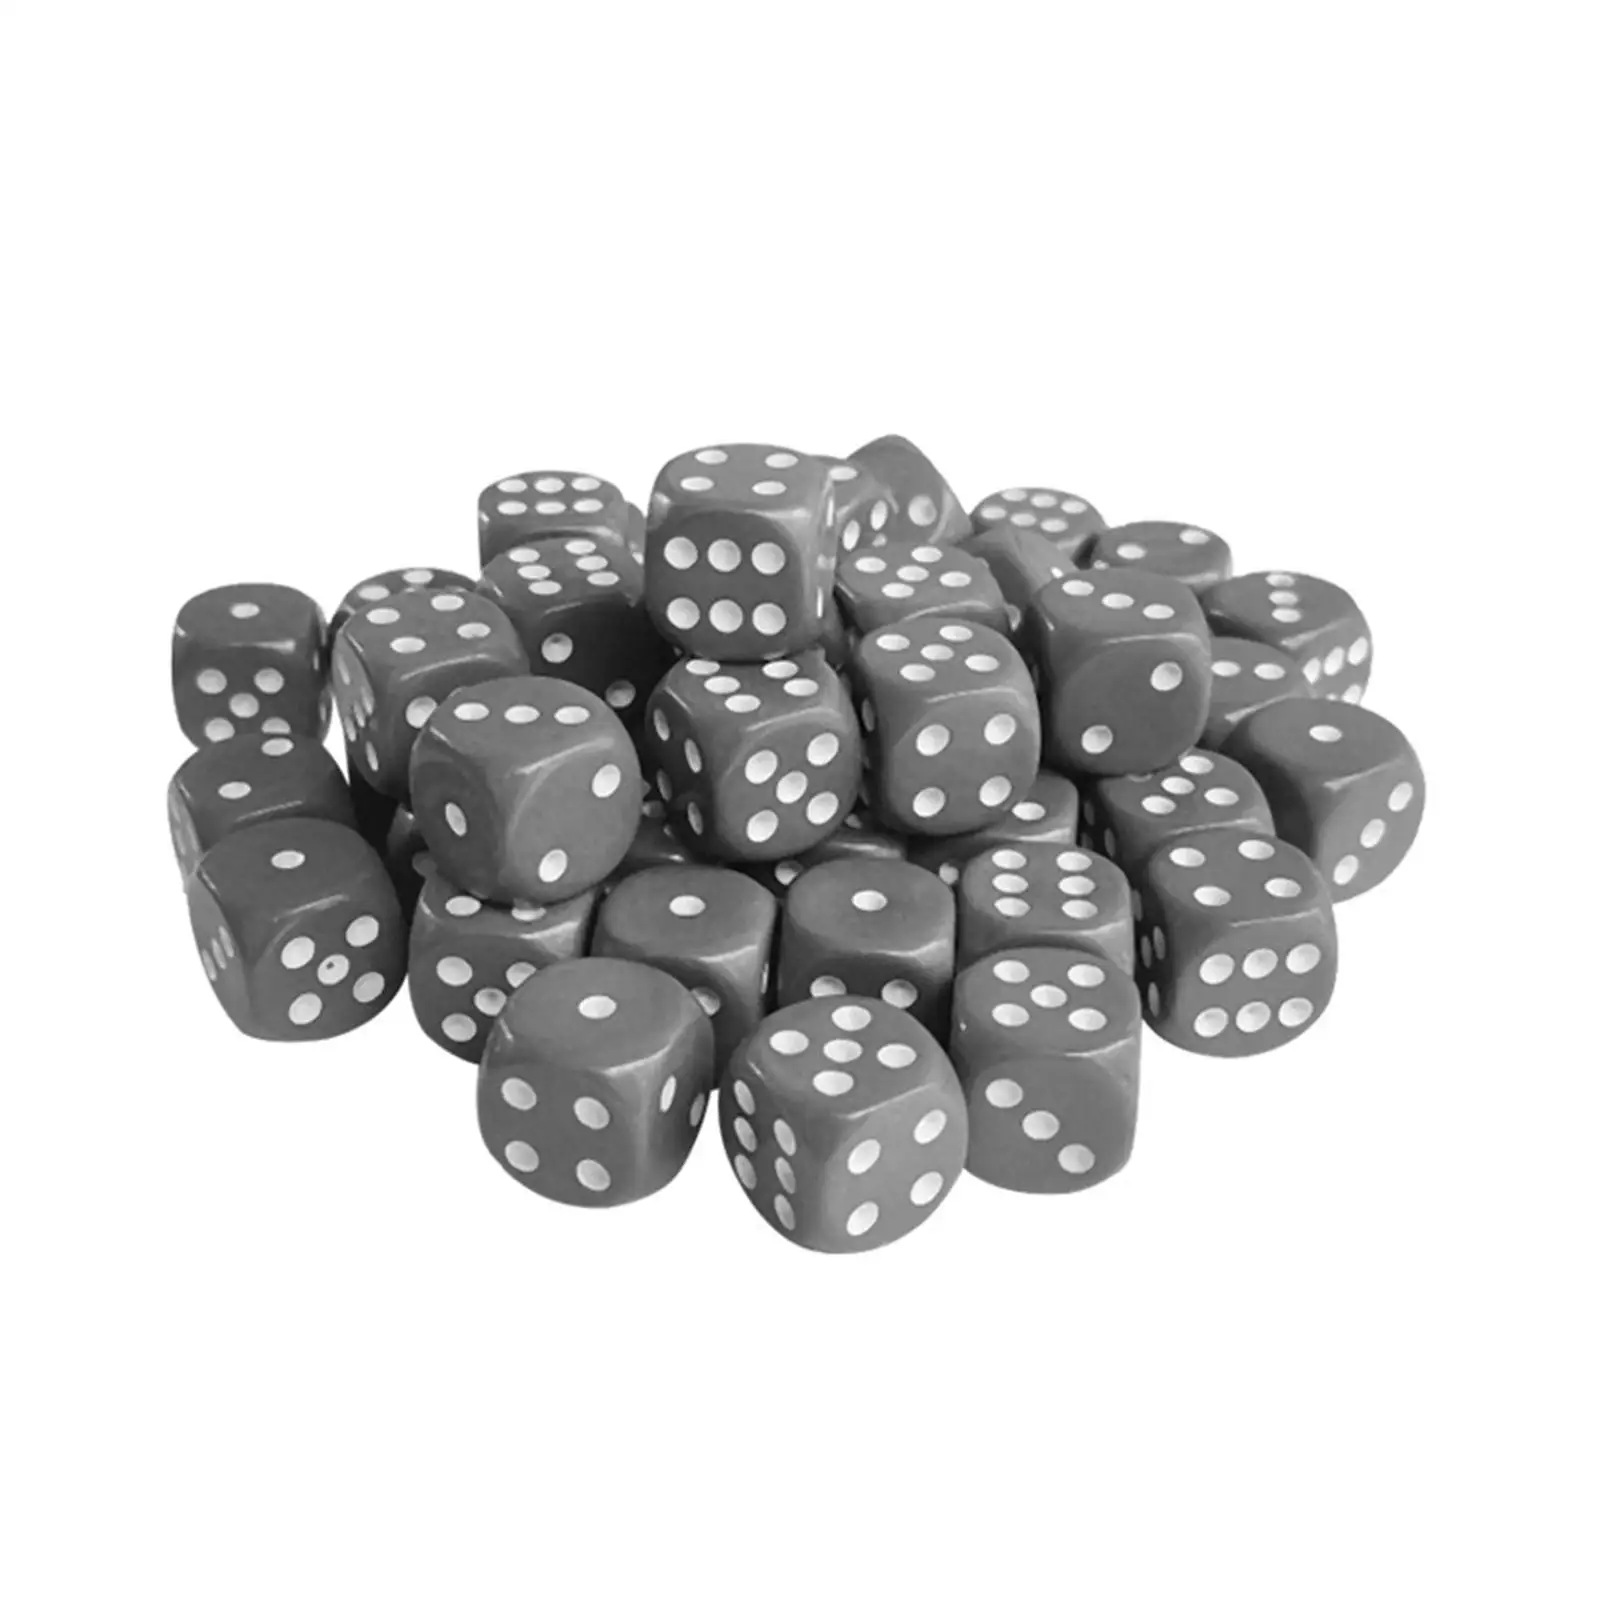 50x Acrylic 6 Sided Dices 16mm Acrylic Dice Board Game Entertainment Toy Party Game Dices Game Dices Polyhedral Dices for Party